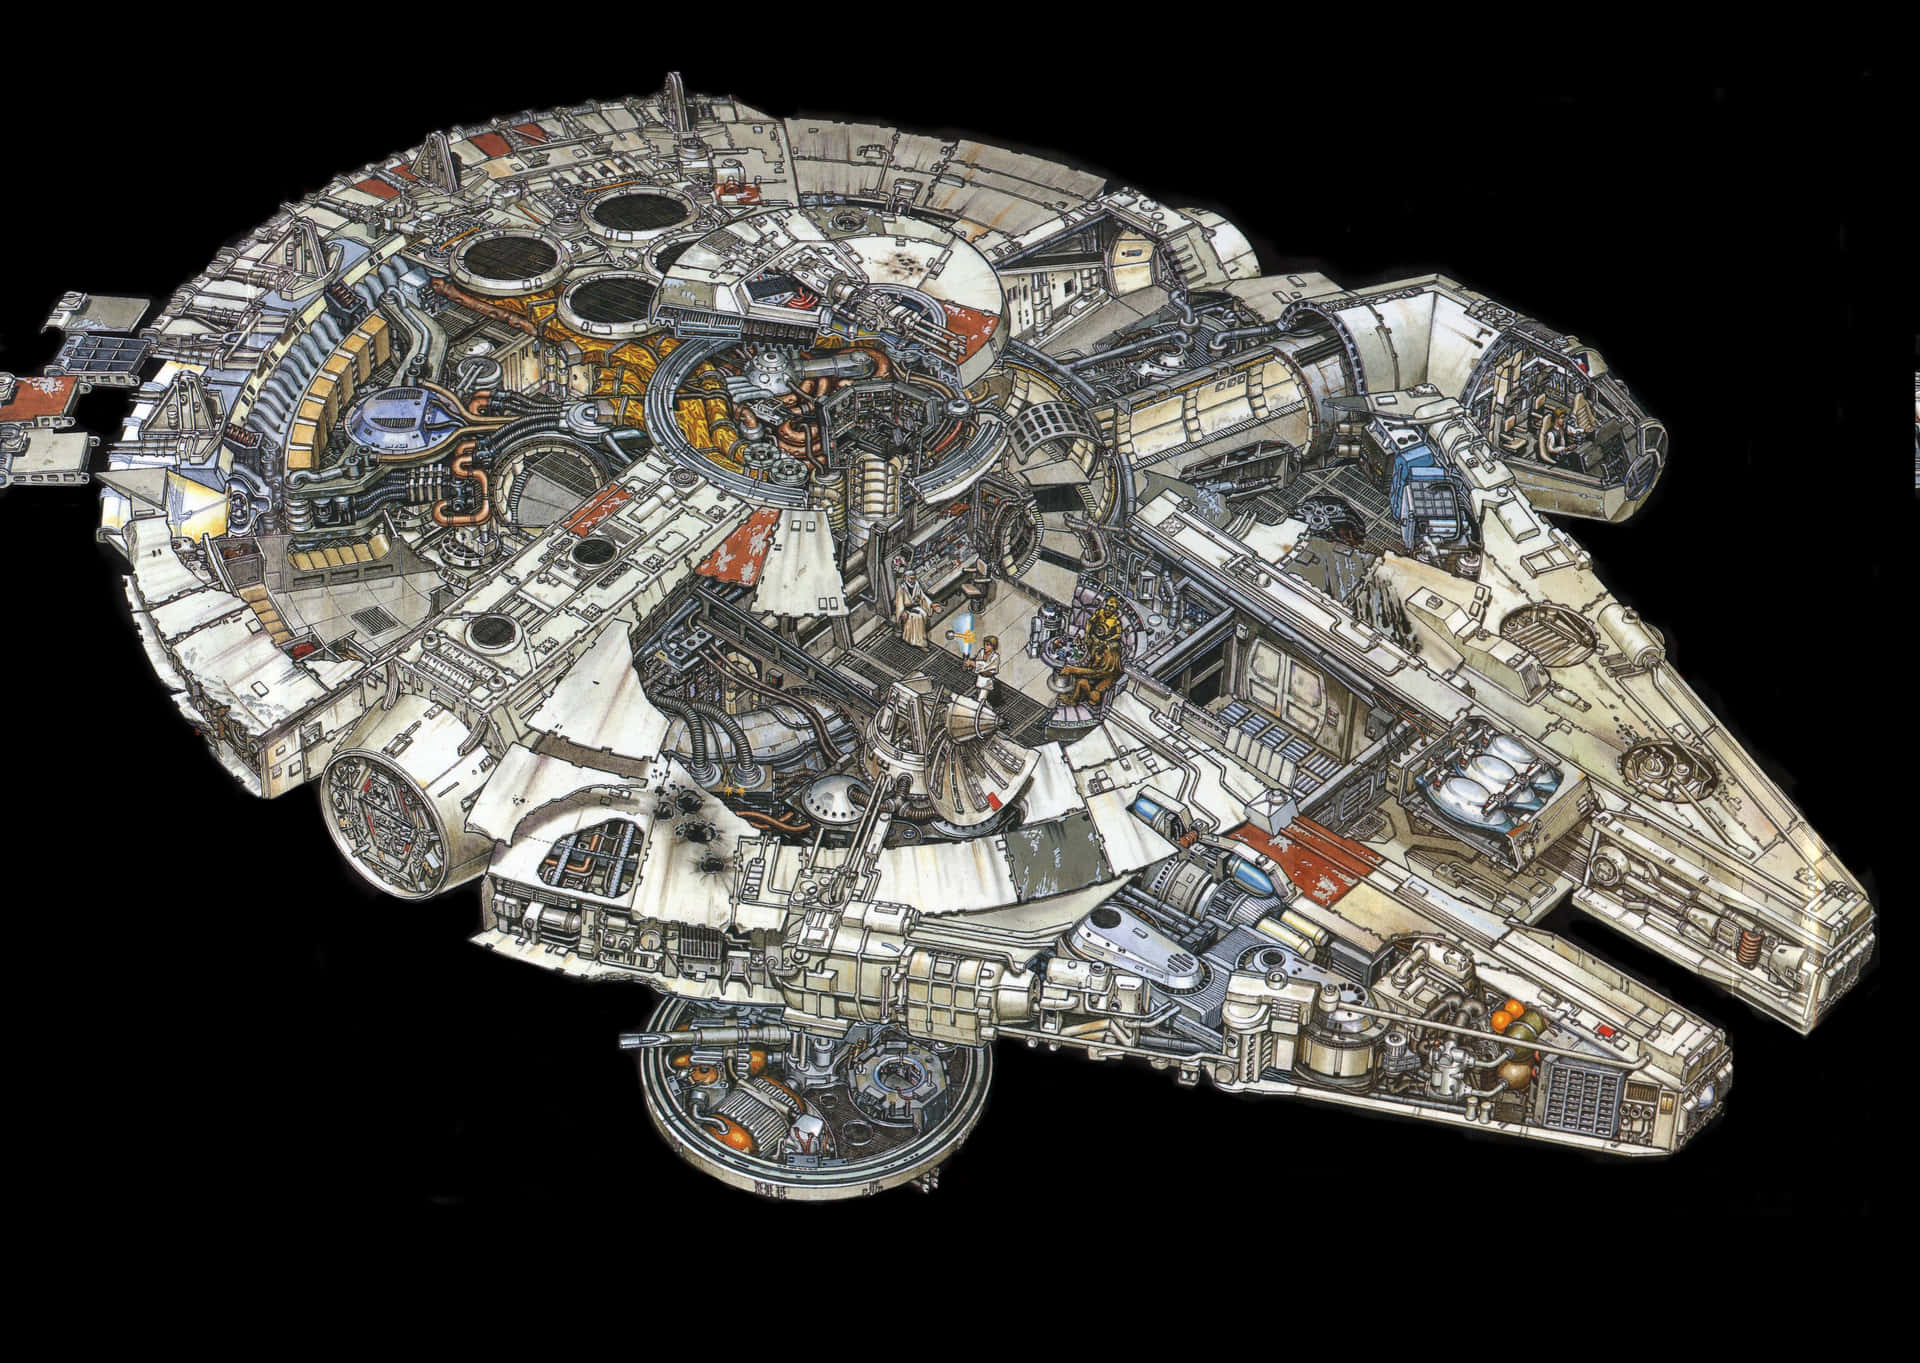 Outpace The Space In The Legendary Millennium Falcon Wallpaper